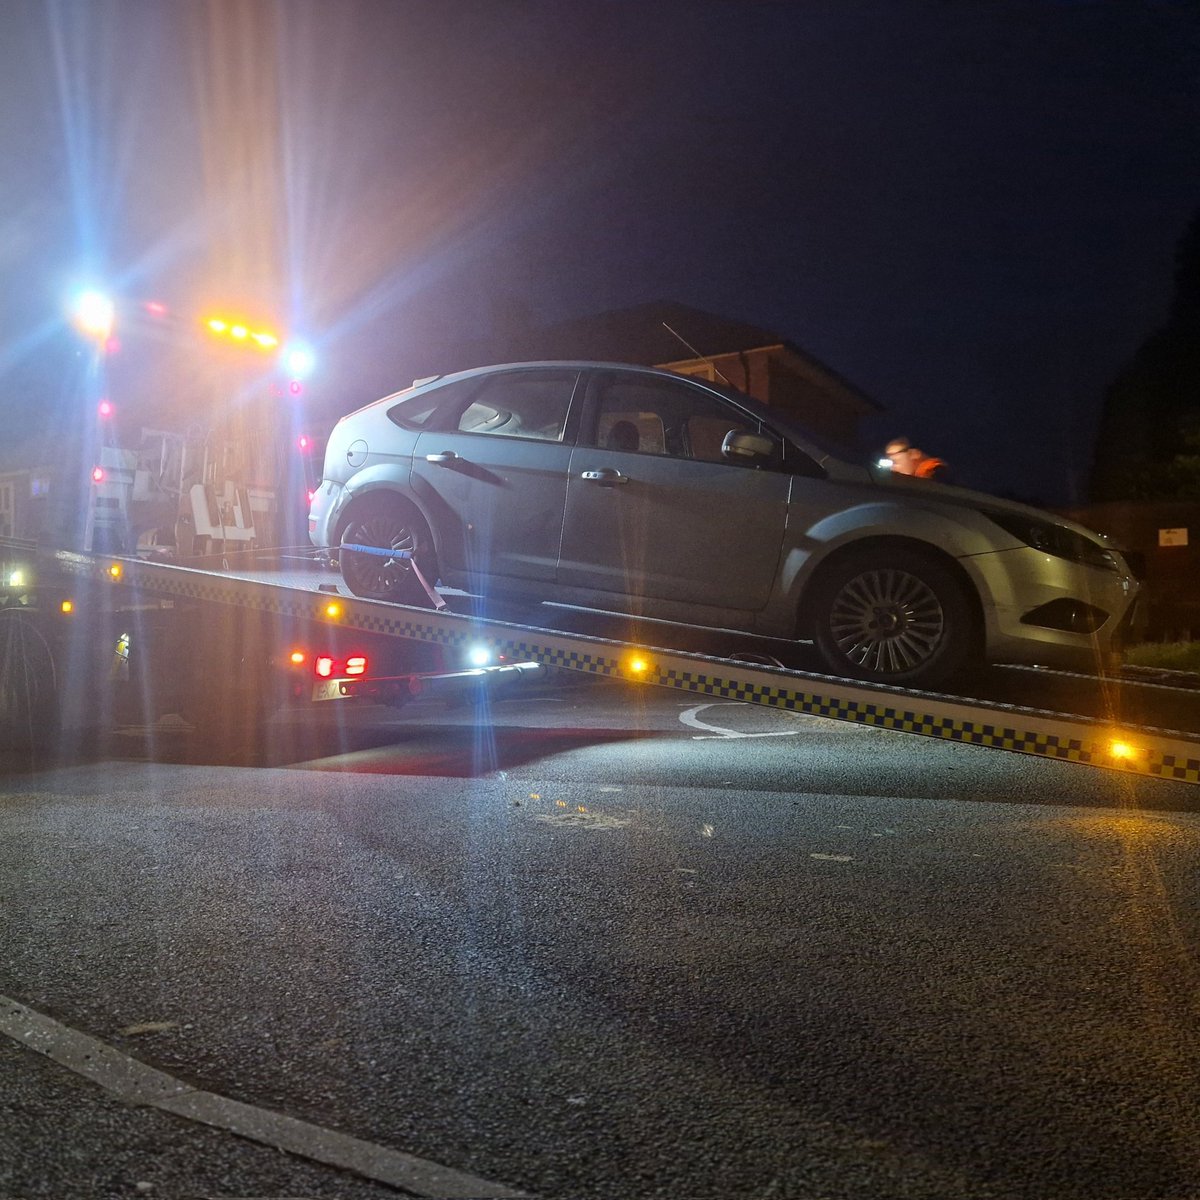 This abandoned vehicle was recovered by the team this evening from the #Aldridge area. It had been previously reported stolen and found to be on cloned plates. Owner of the vehicle has been made aware. 🚙👮🏻‍♂️